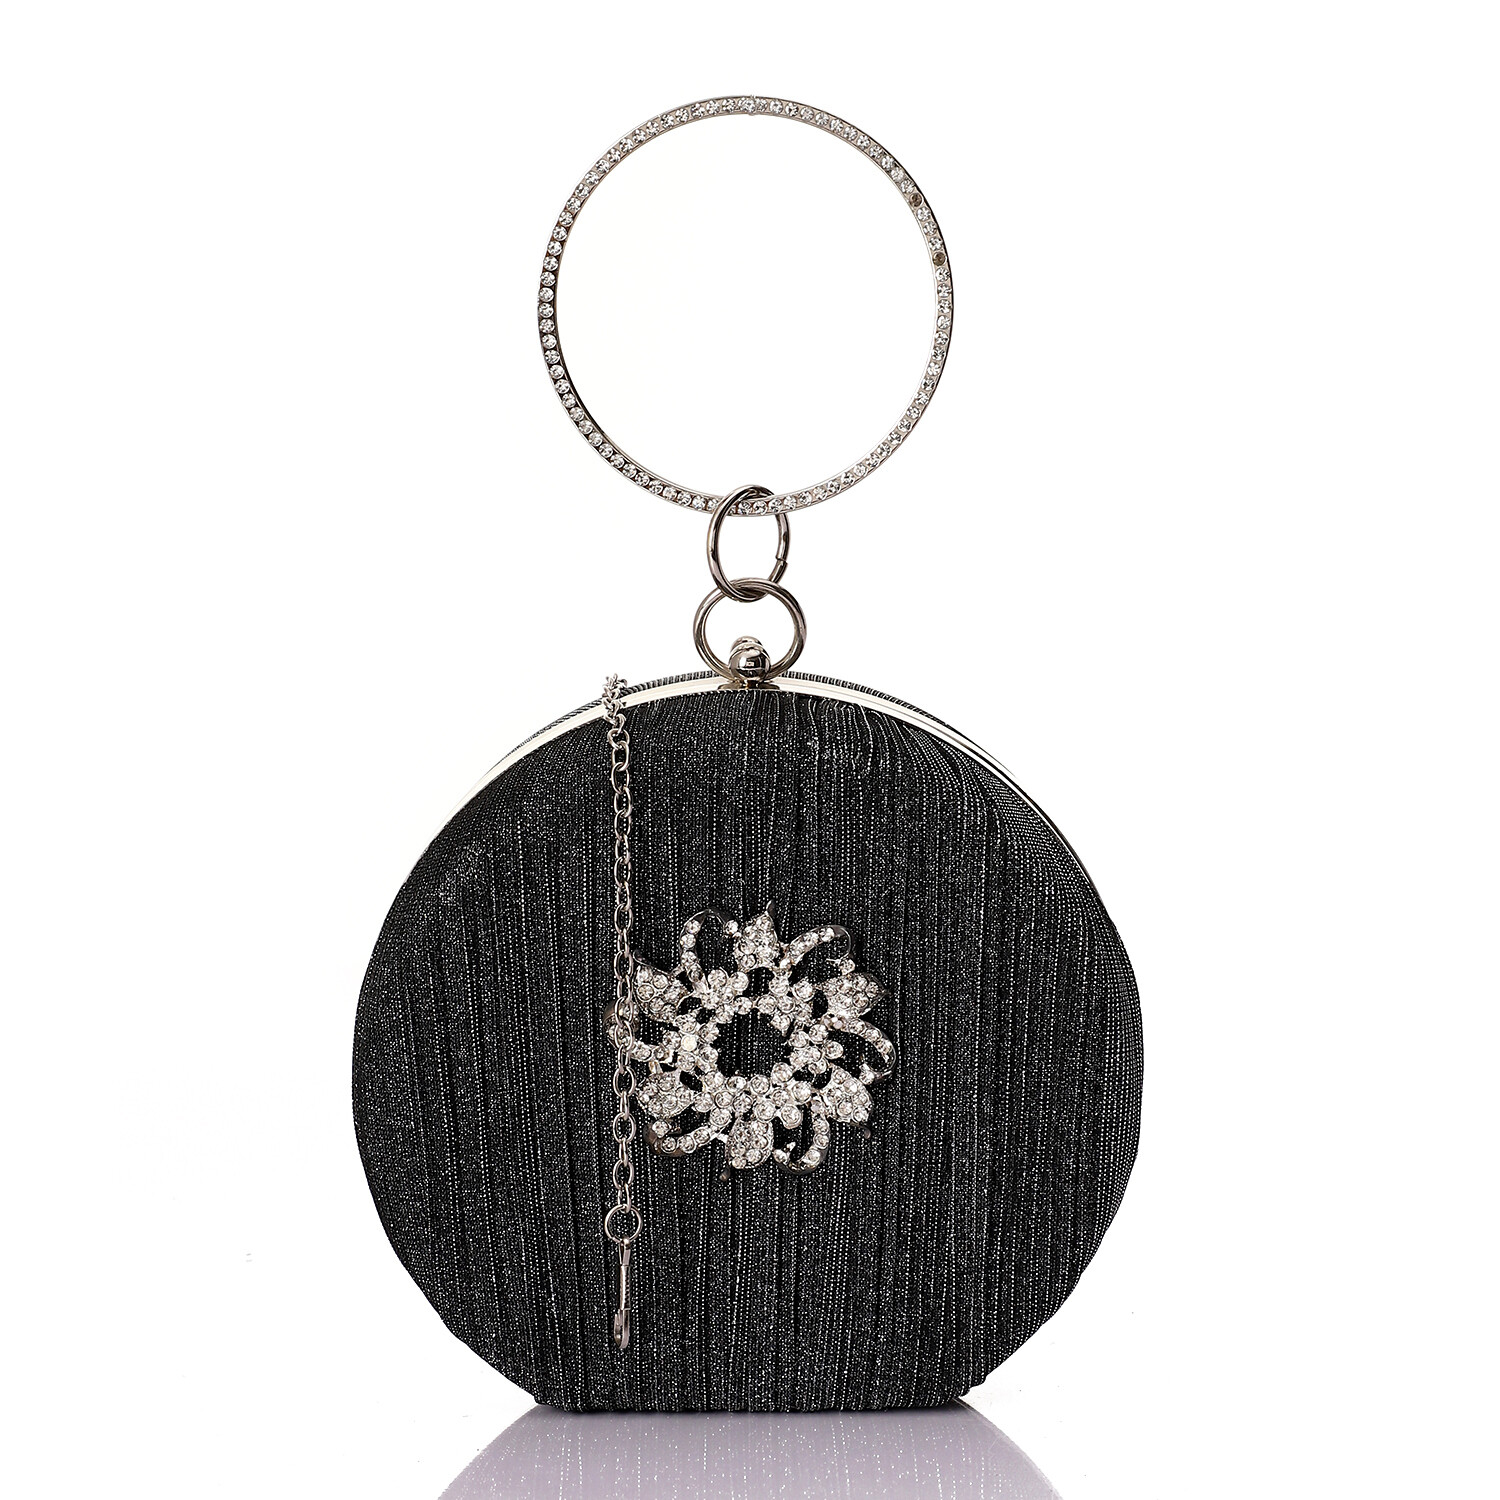 Circular Glittery Soiree Bag With Front Buckle - Grey-4938